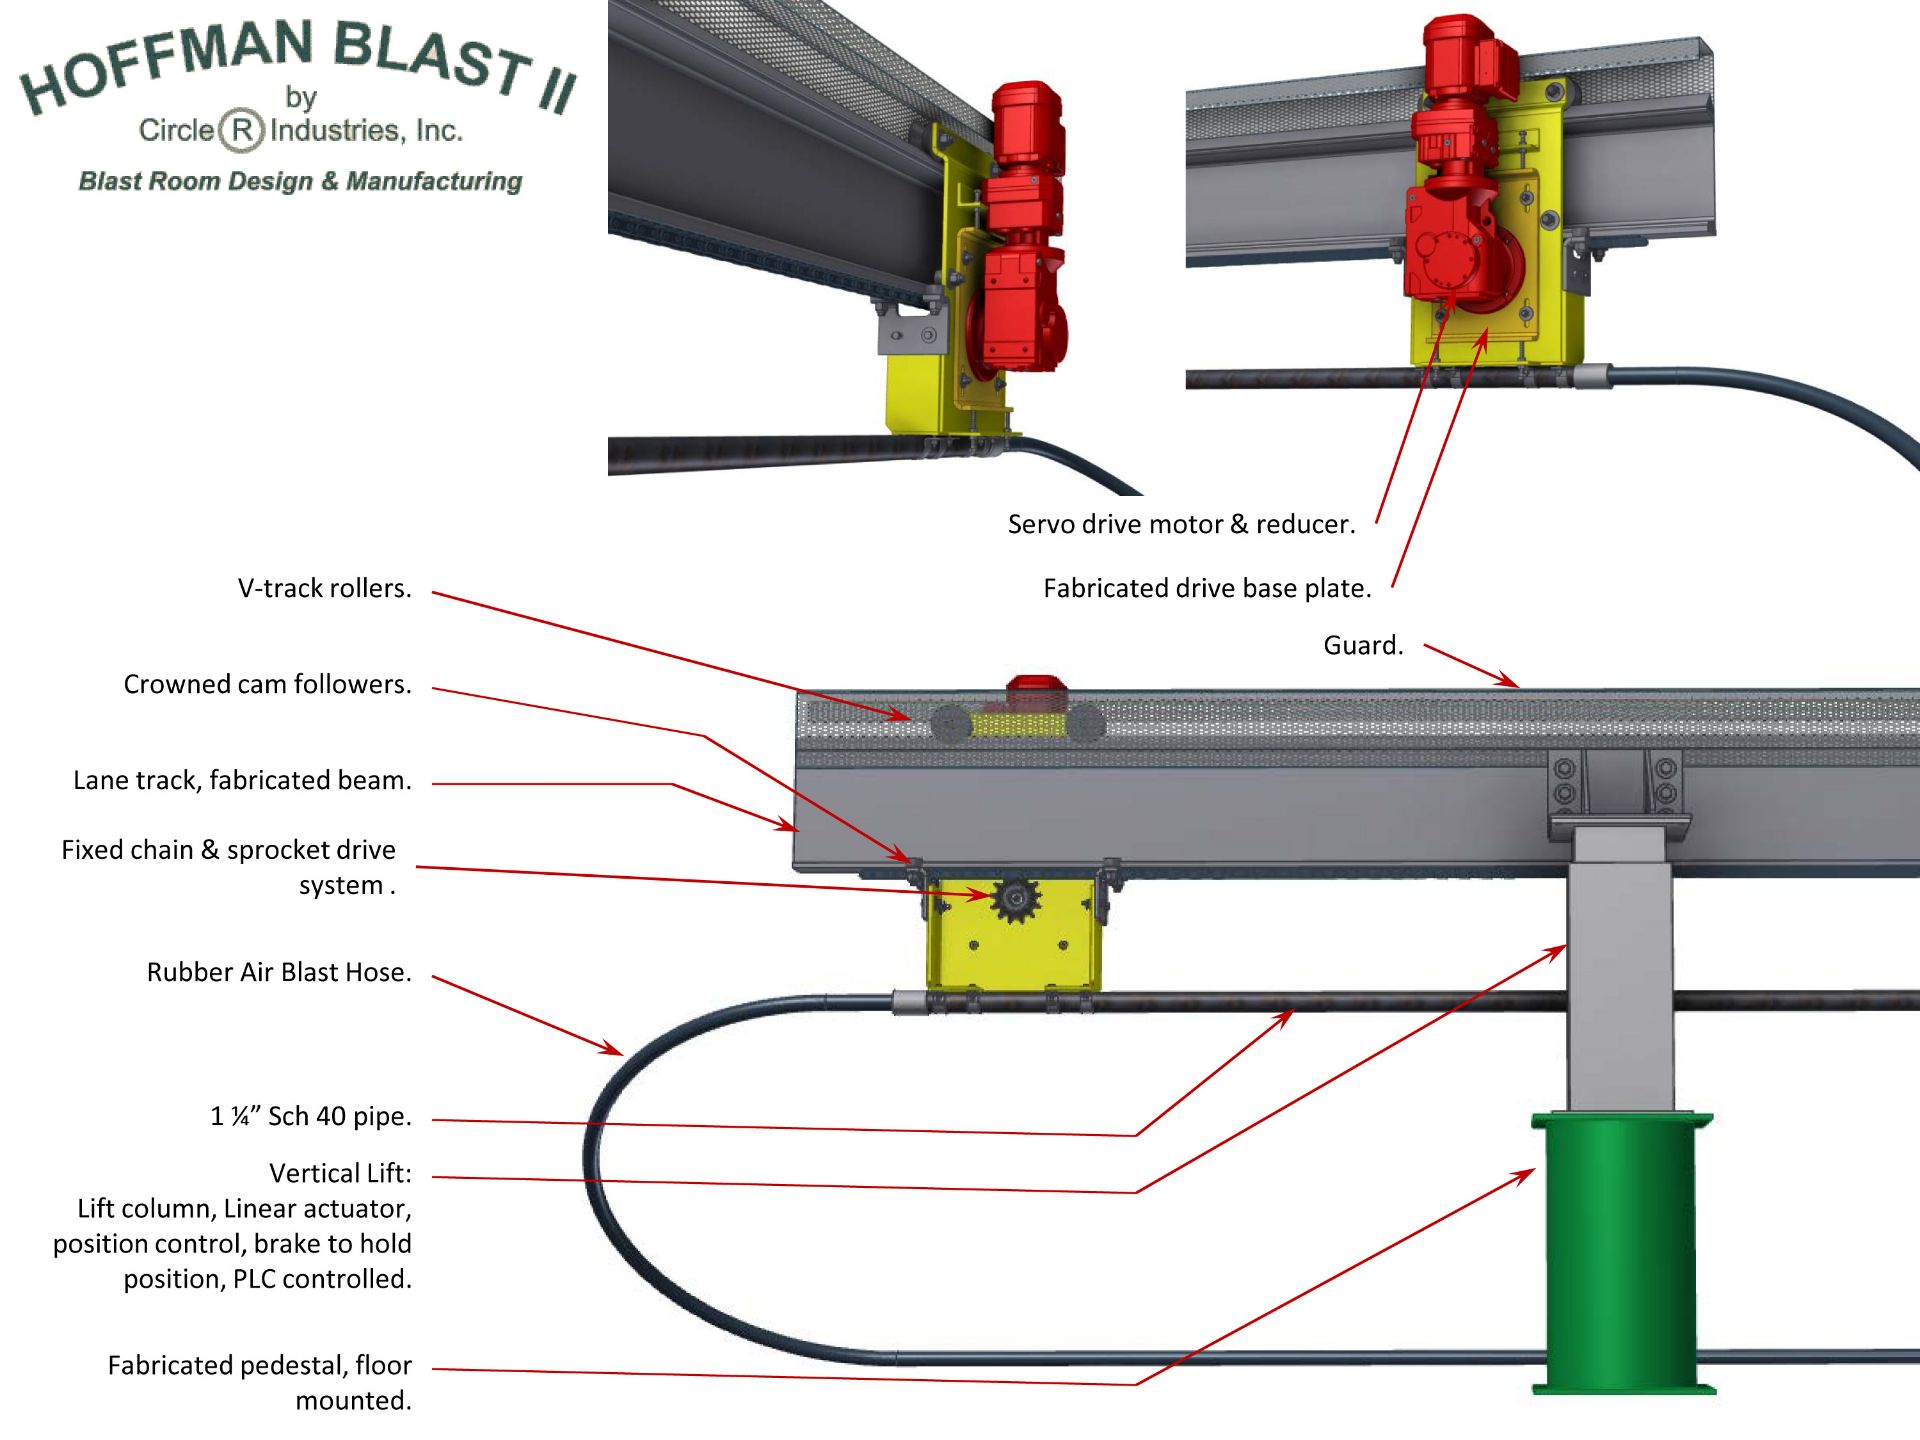 Complete Hoffman Blast II Line semi-automated system Prececo line (contains lots 160, 161, 162) - Image 8 of 14